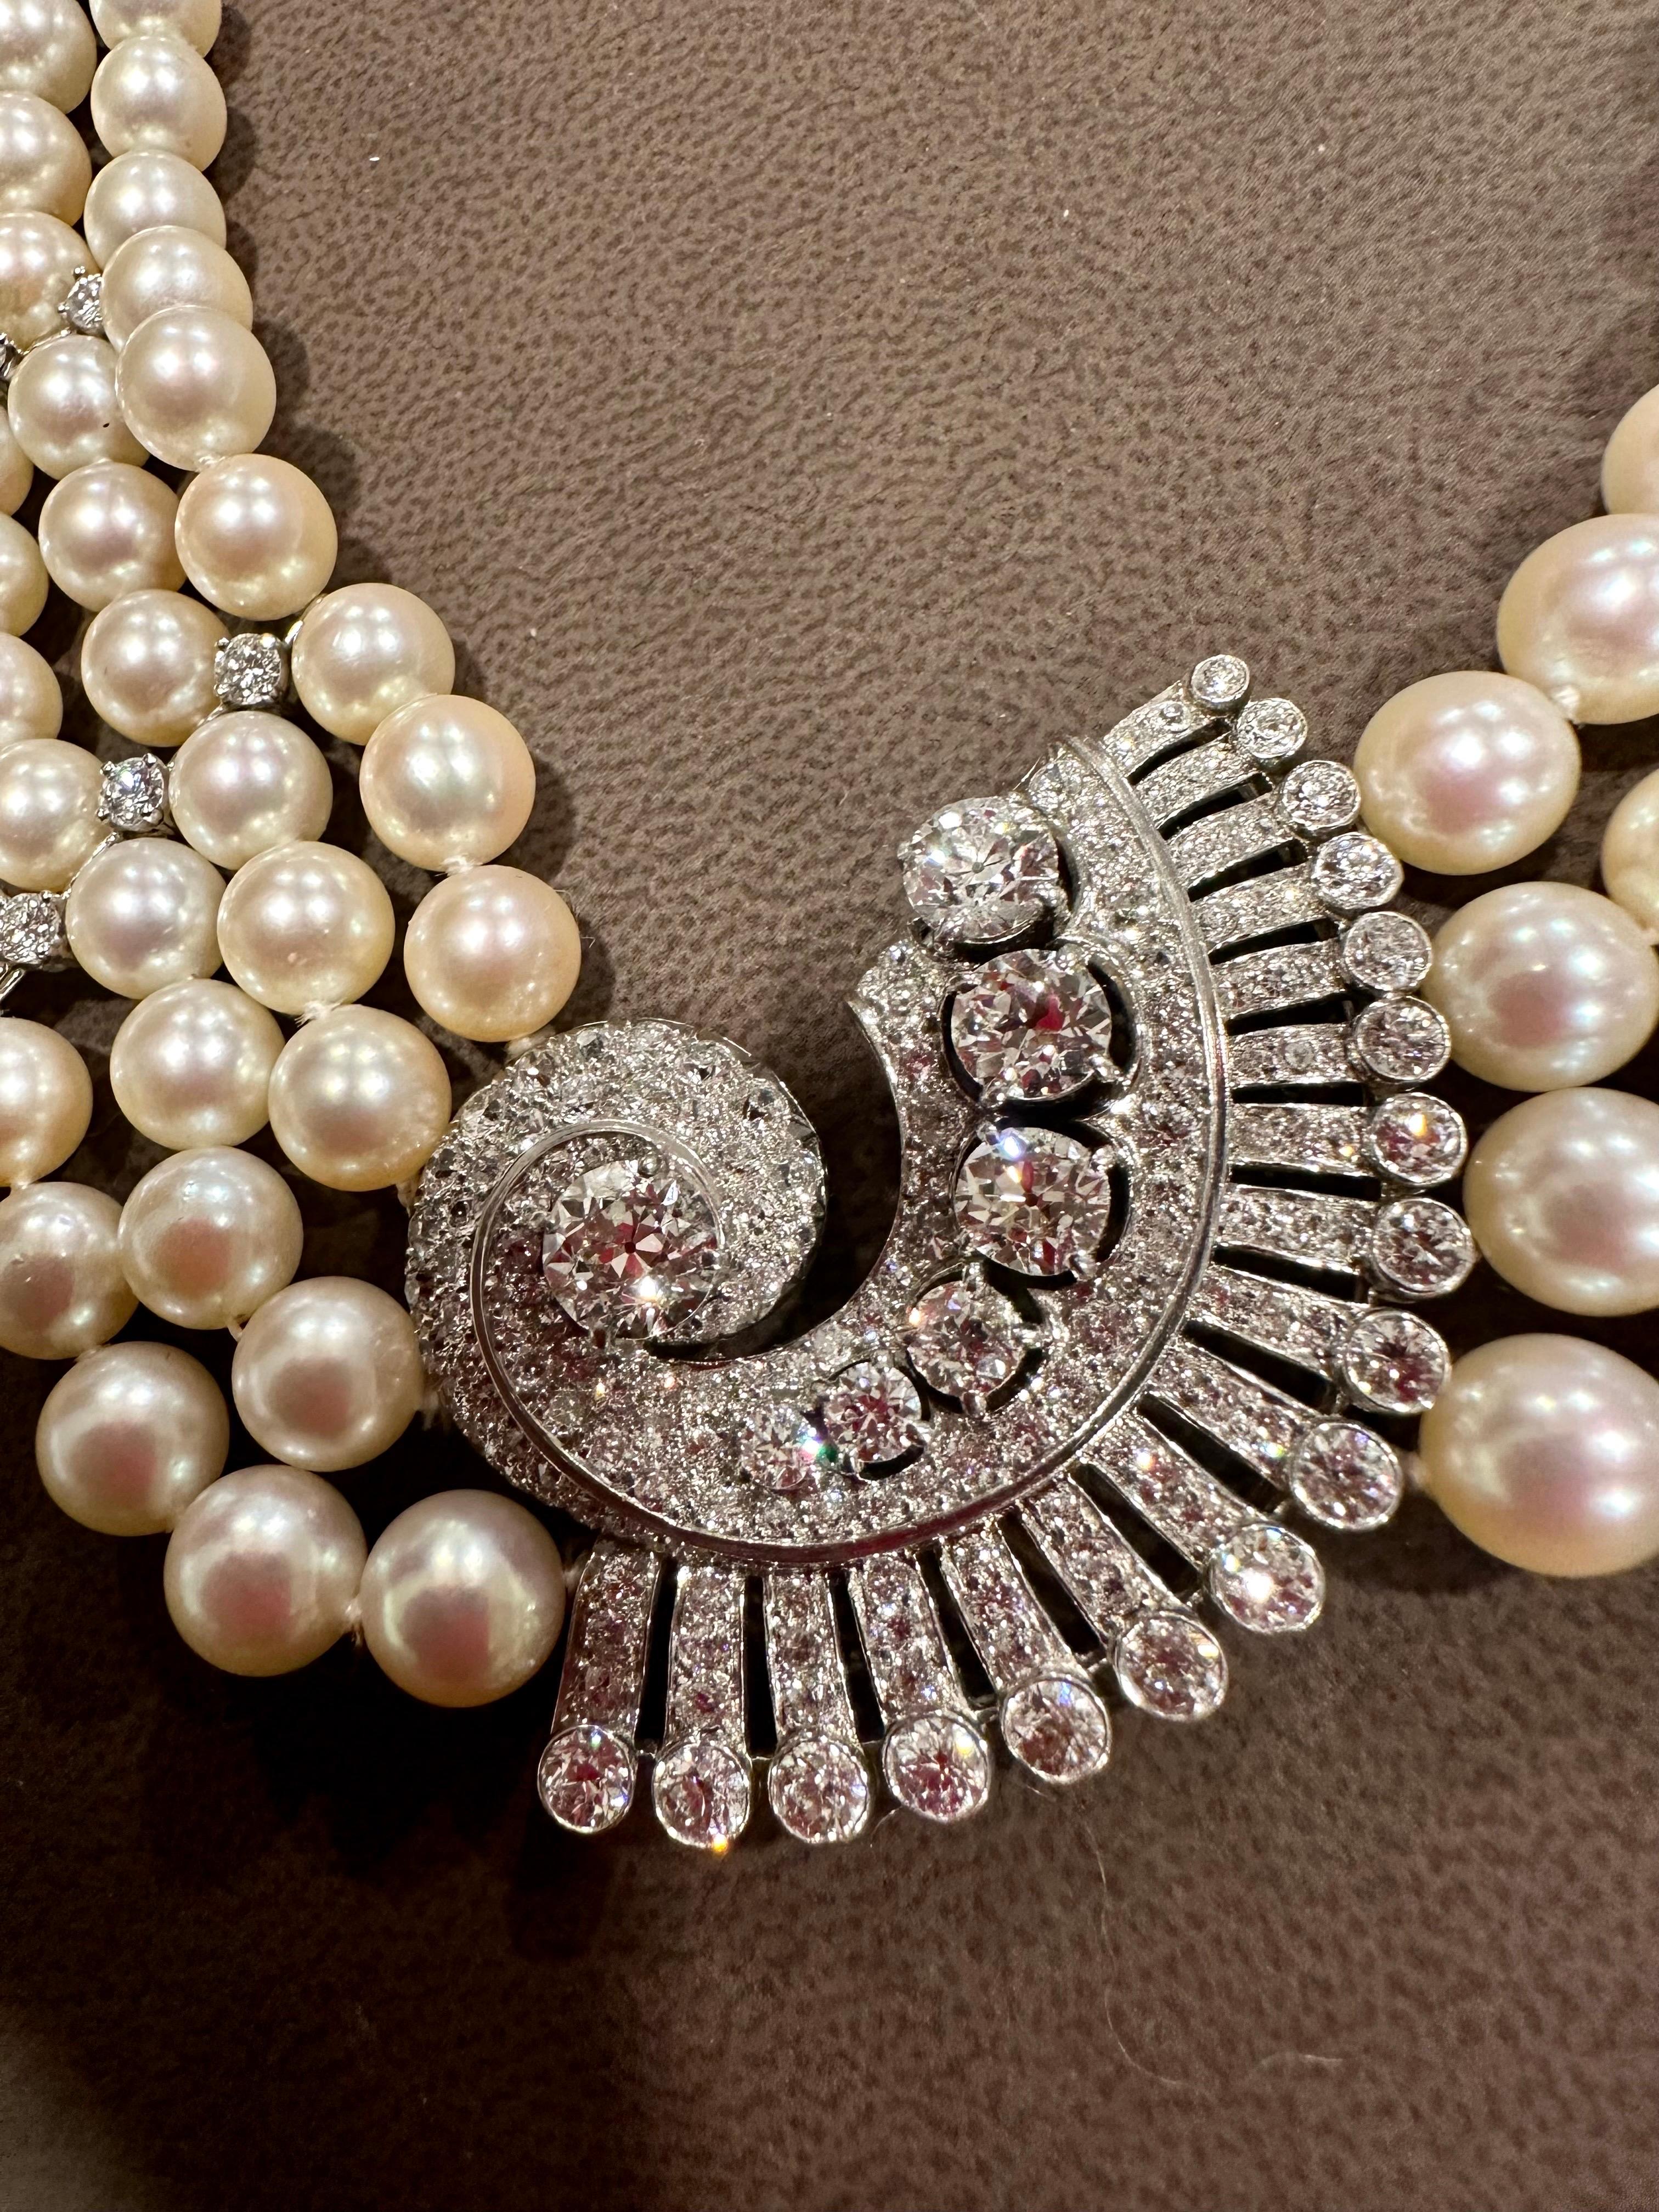 Antique 14.5ct Diamond Center Brooch  with Pearls Necklace in Platinum Bridal In Excellent Condition For Sale In New York, NY